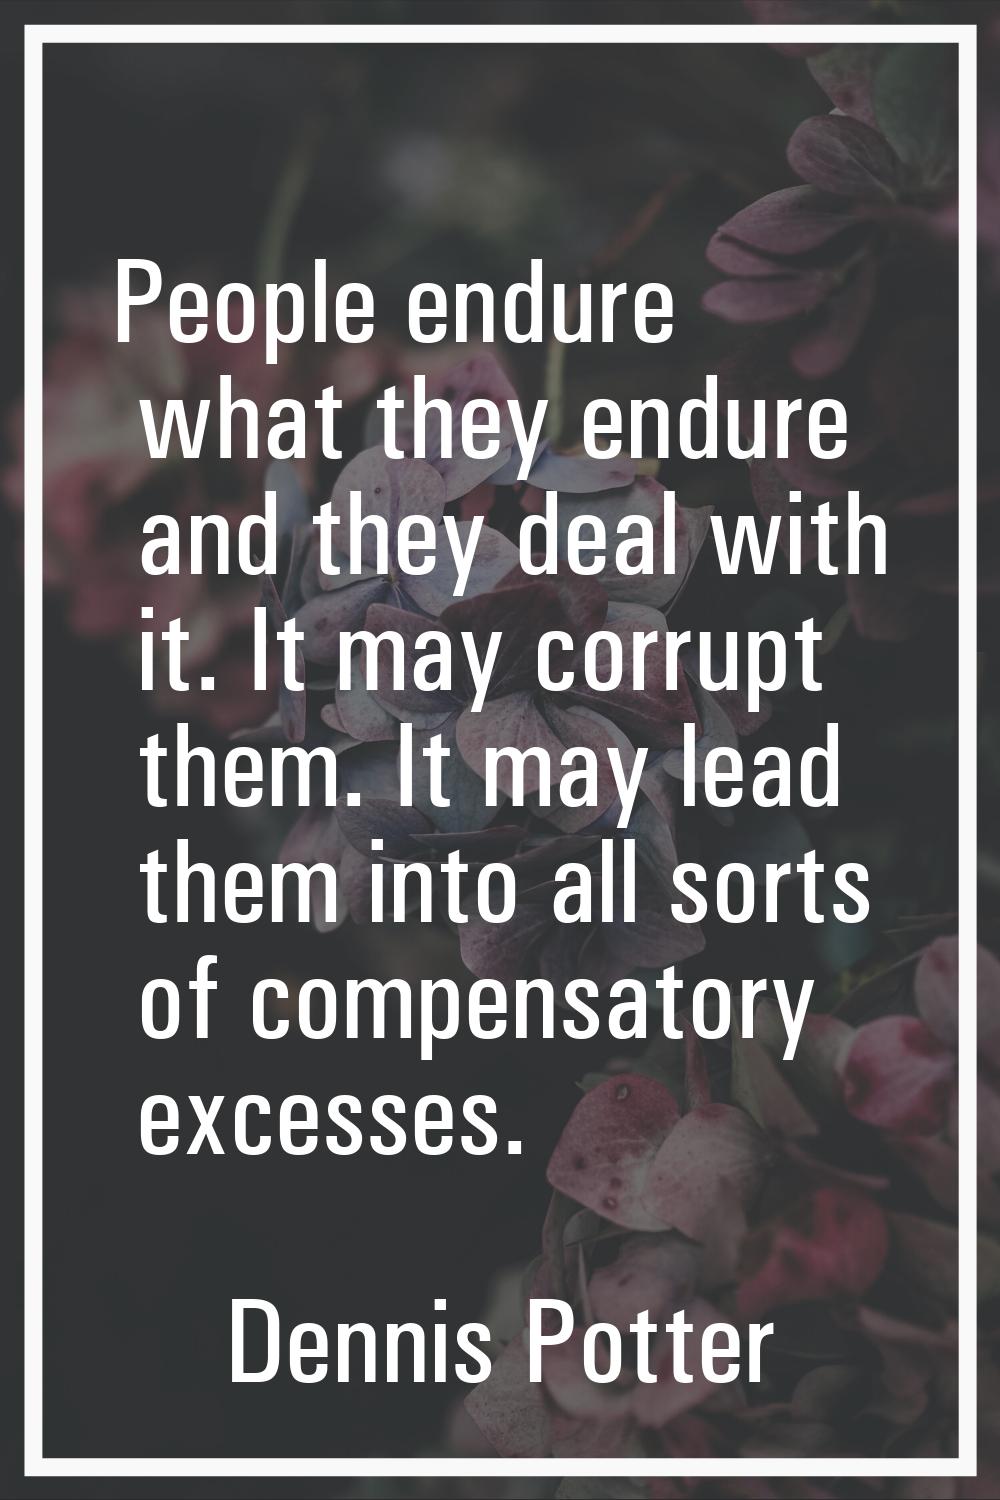 People endure what they endure and they deal with it. It may corrupt them. It may lead them into al